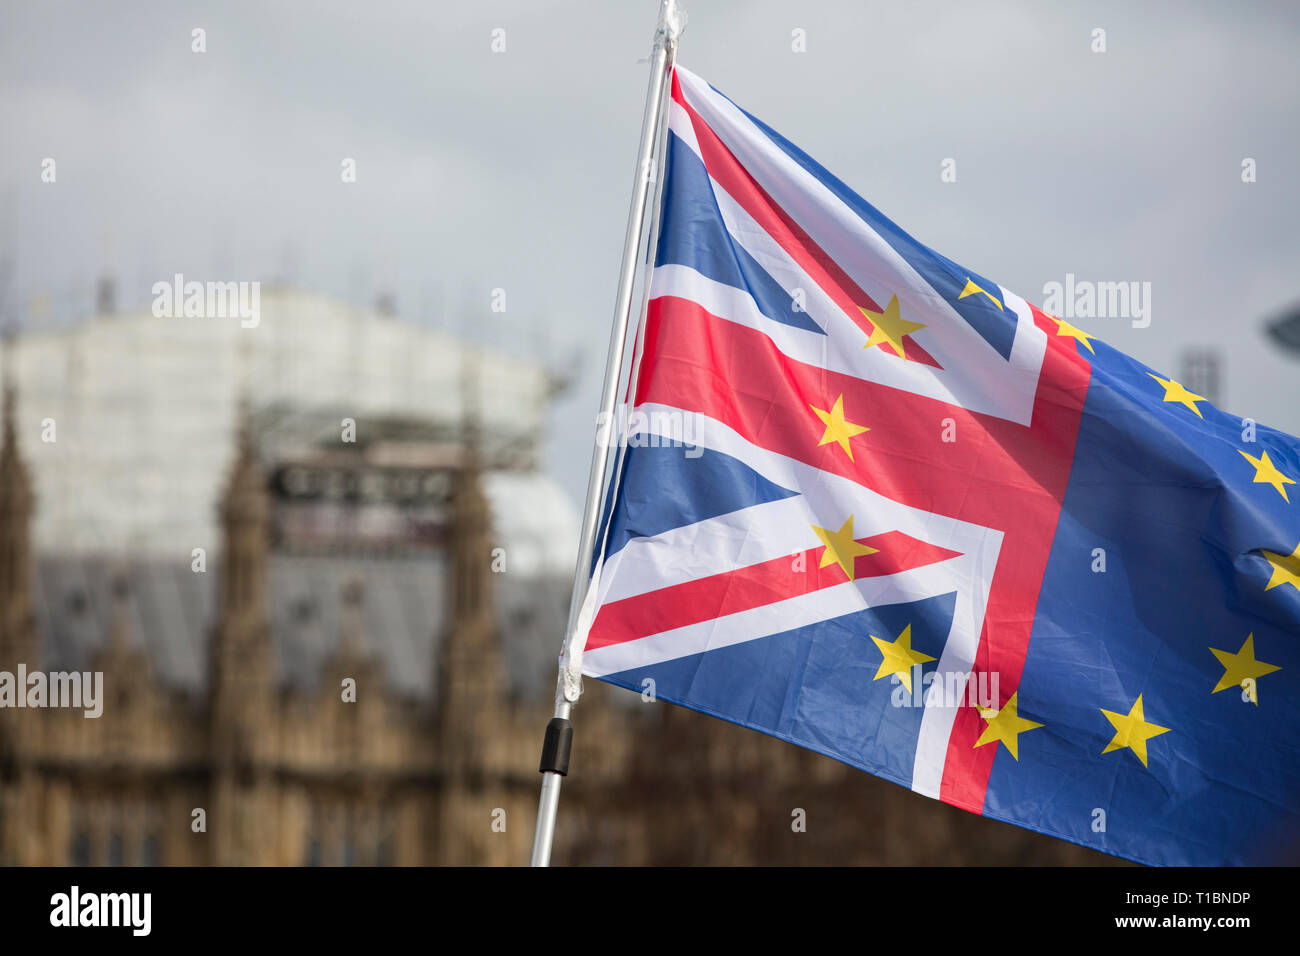 European Union and British flags fly together at an anti-Brexit political march Stock Photo